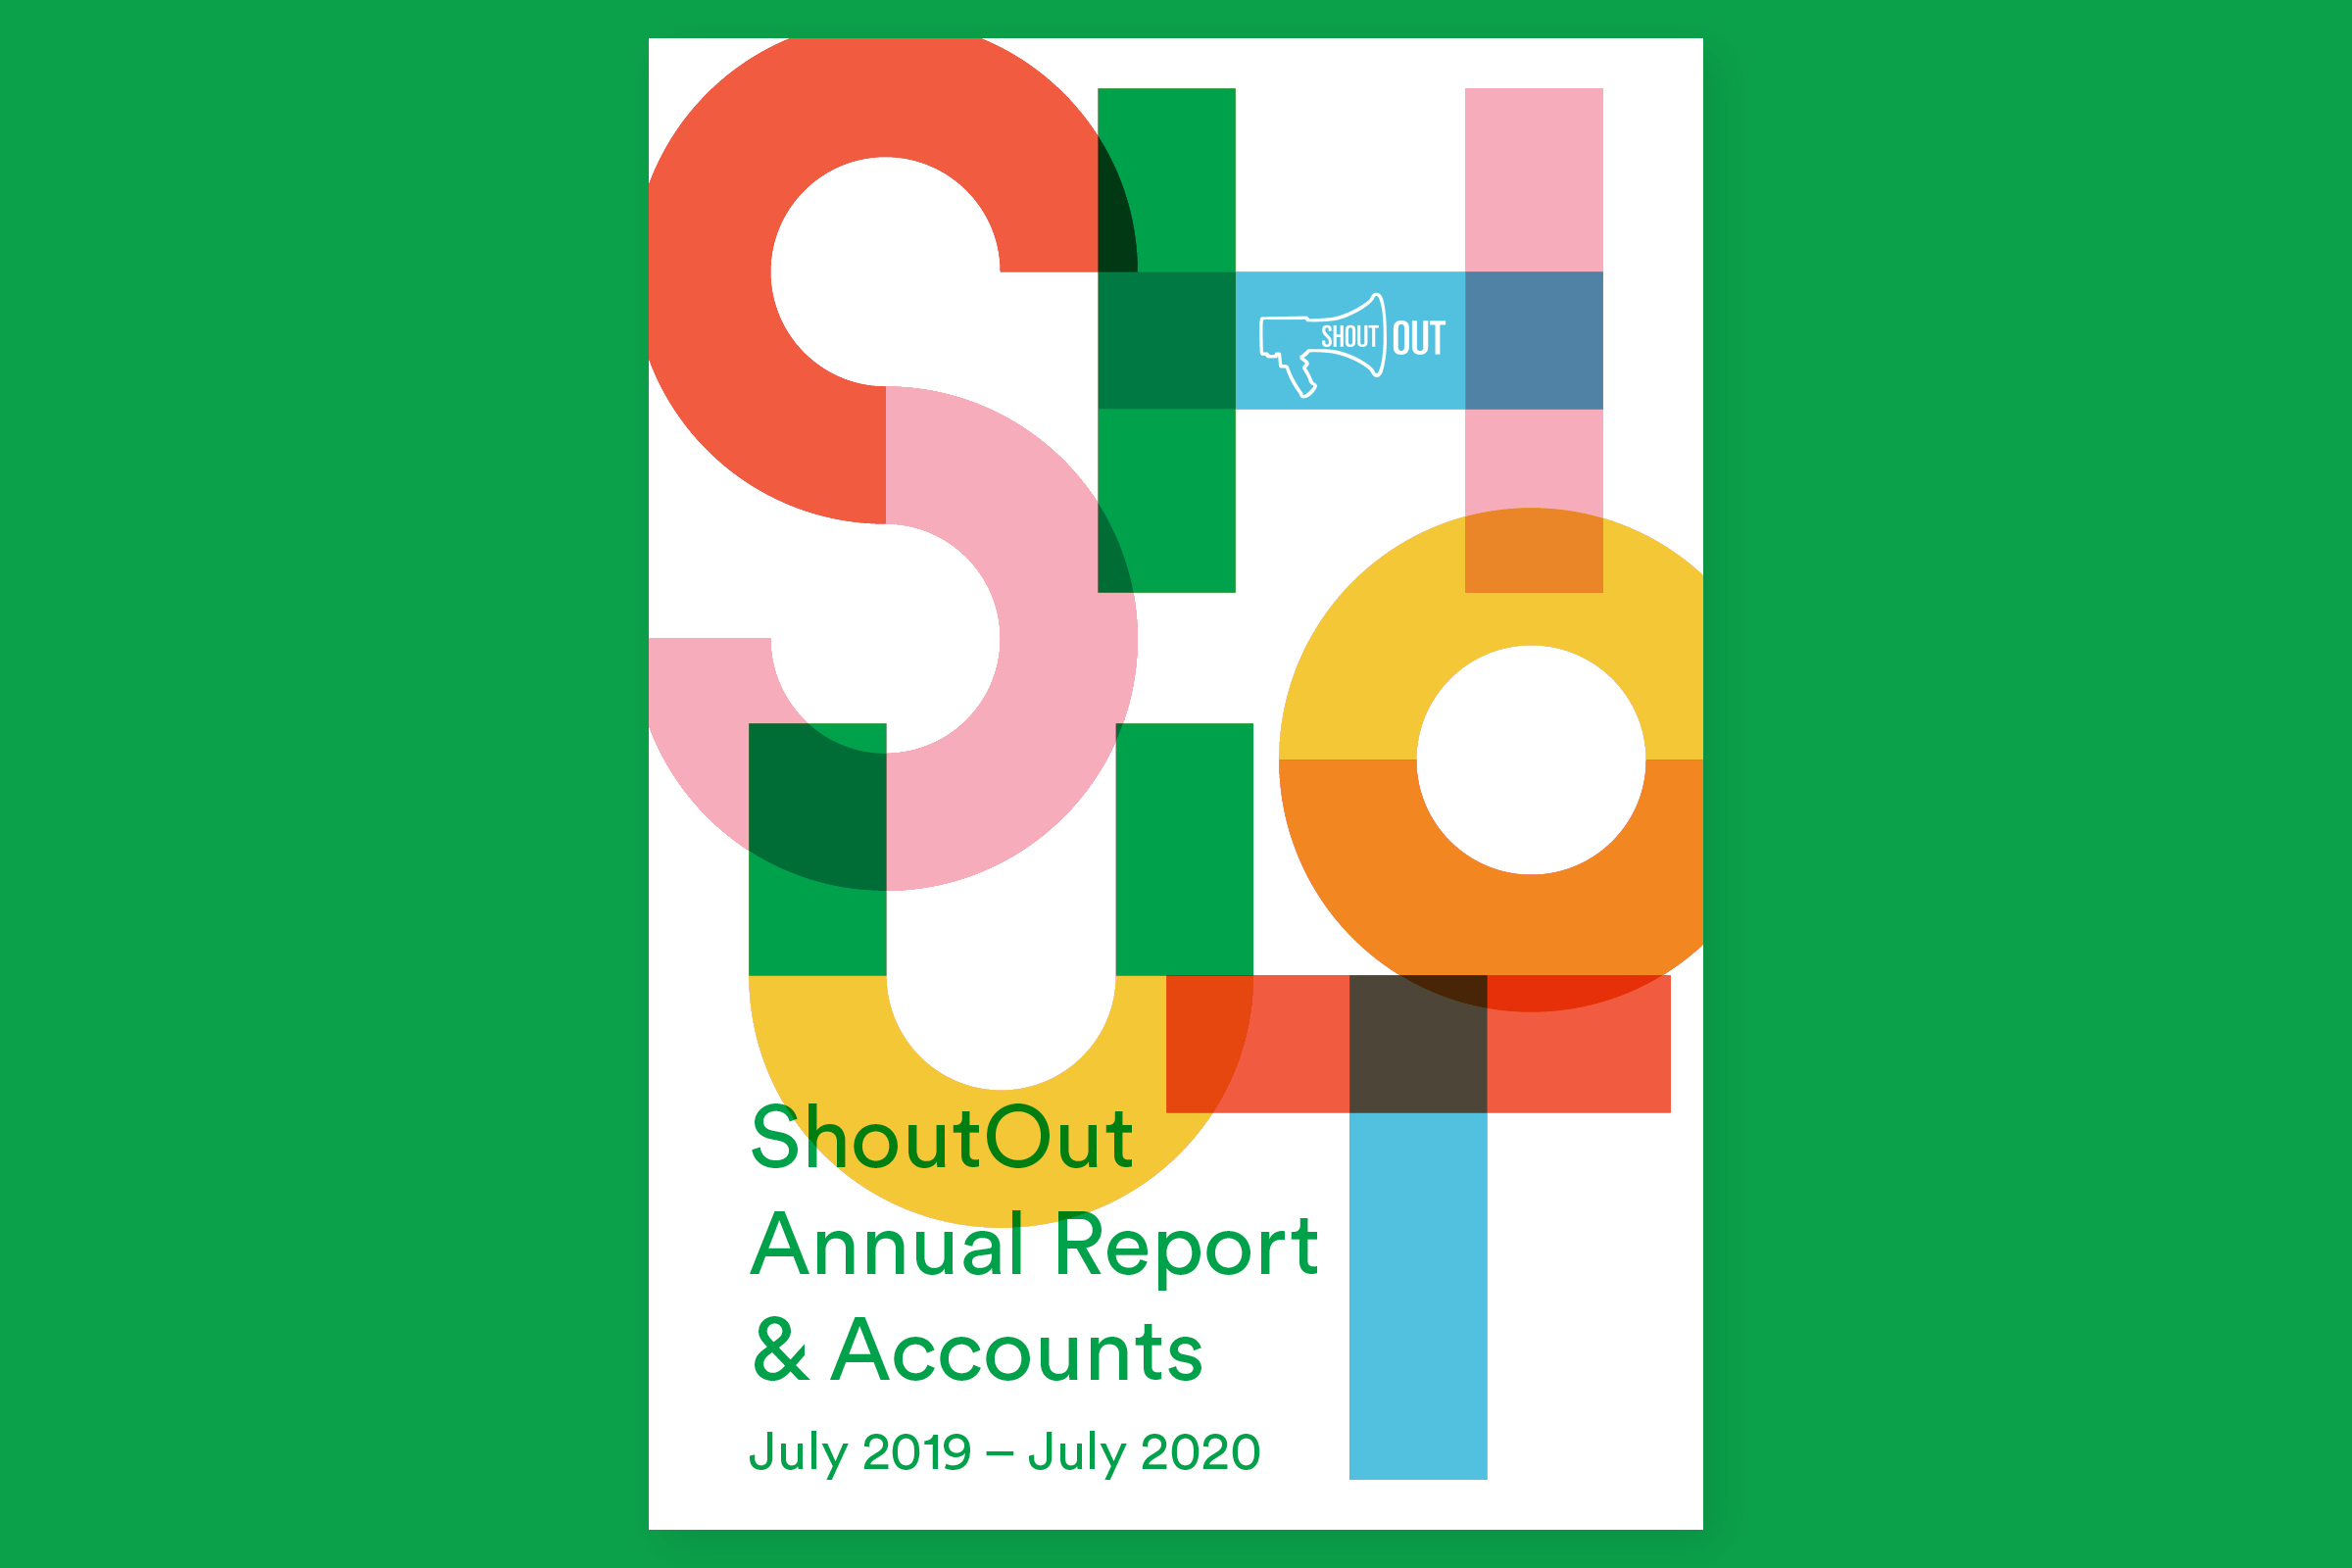 SHOUT OUT ANNUAL REPORT